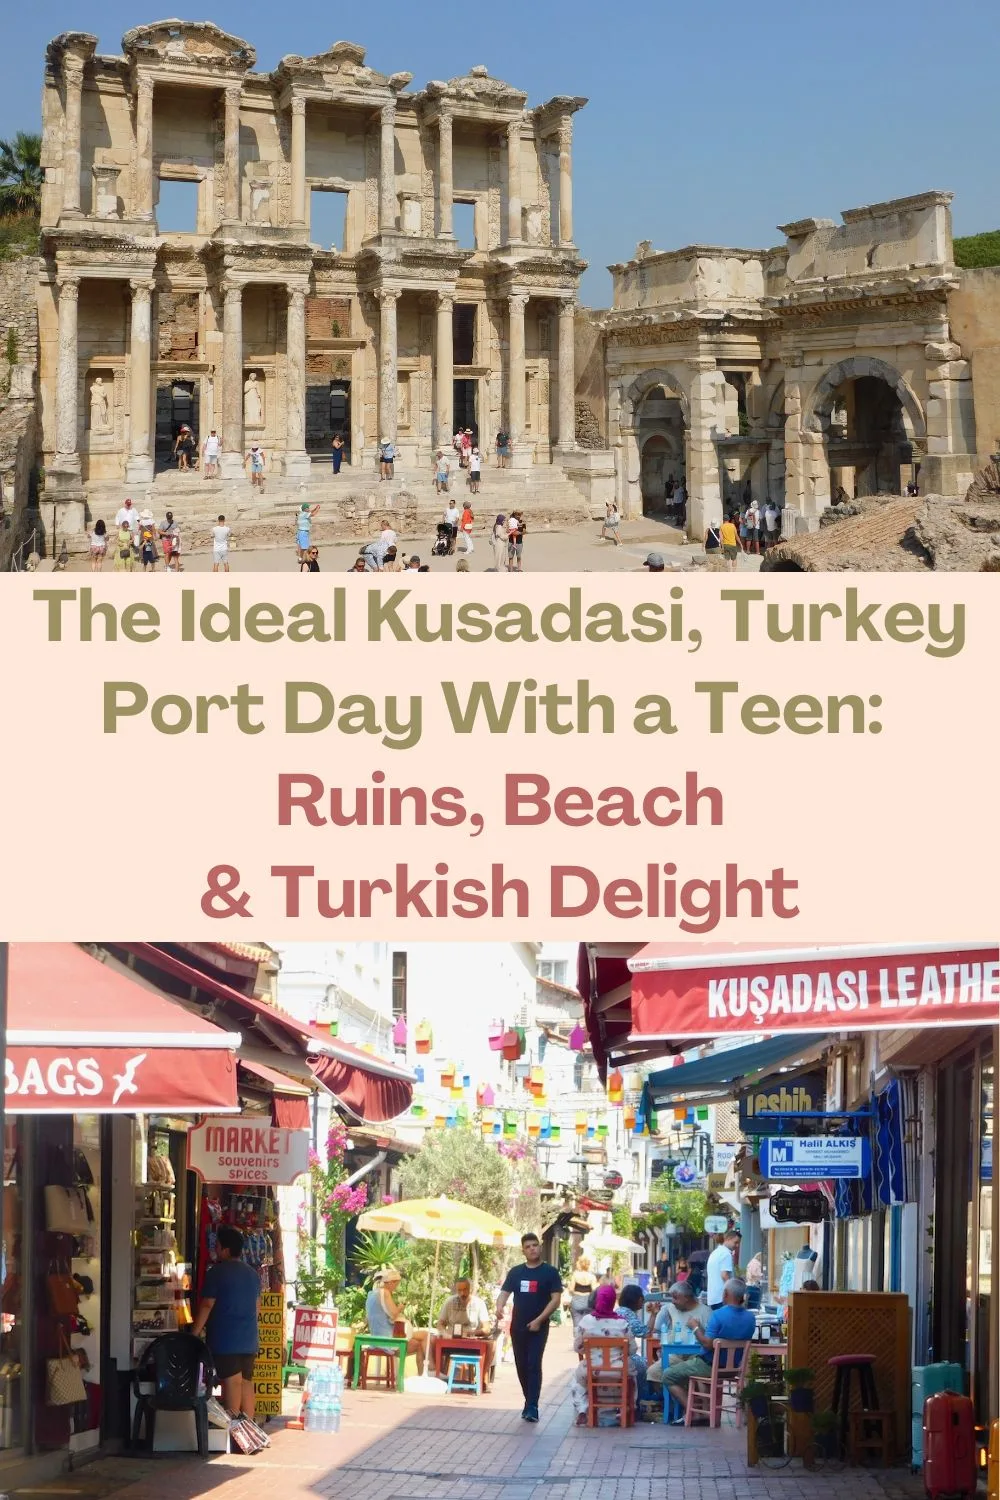 the ideal kusadasi, turkey port day with teens includes time at the beach, plus eating and shopping in the old town bazaar and a visit to the ruins of ephesus.